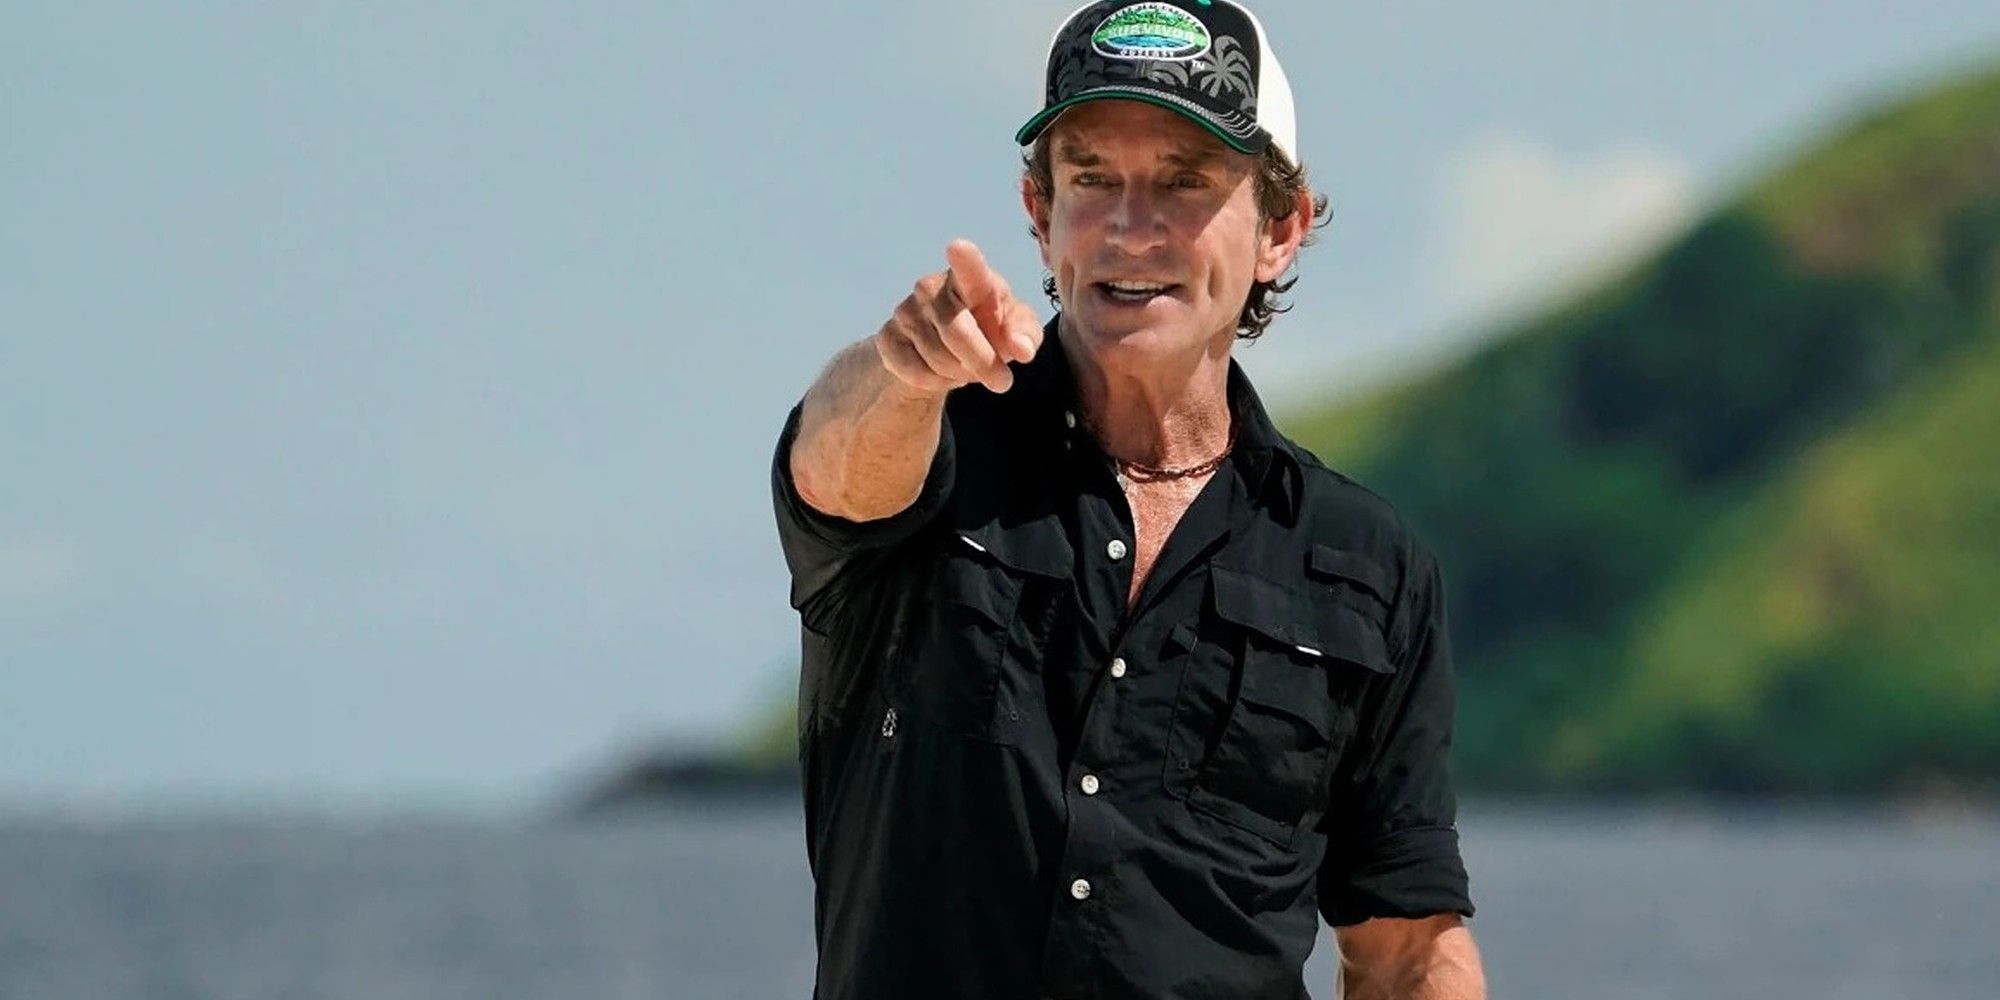 Jeff Probst Survivor 43 pointing his finger in front of sea